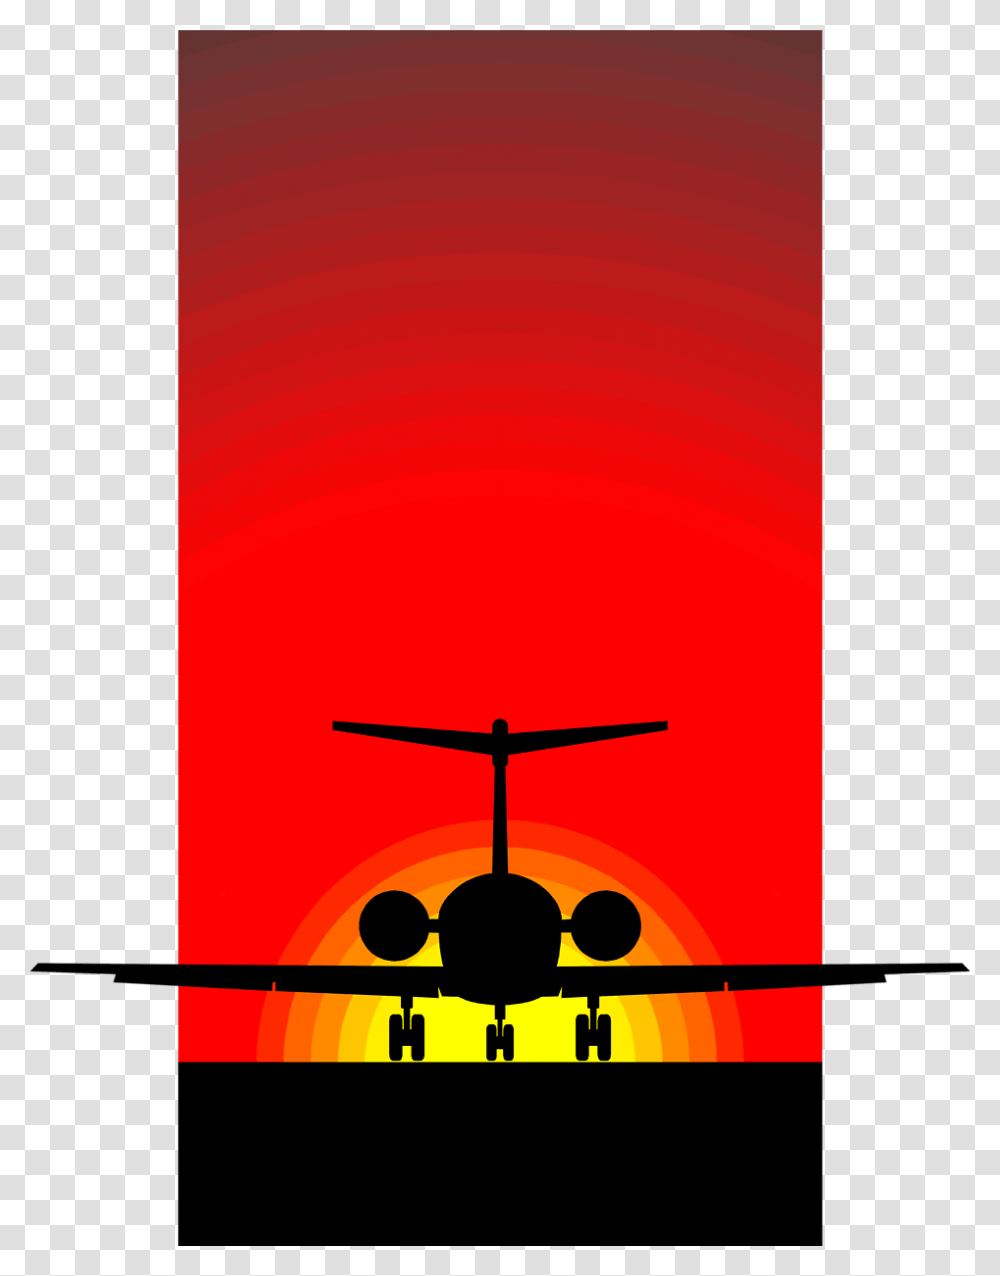 Airplane Free Stock Photo Illustration Of A Silhouette, Aircraft, Vehicle, Transportation, Airliner Transparent Png